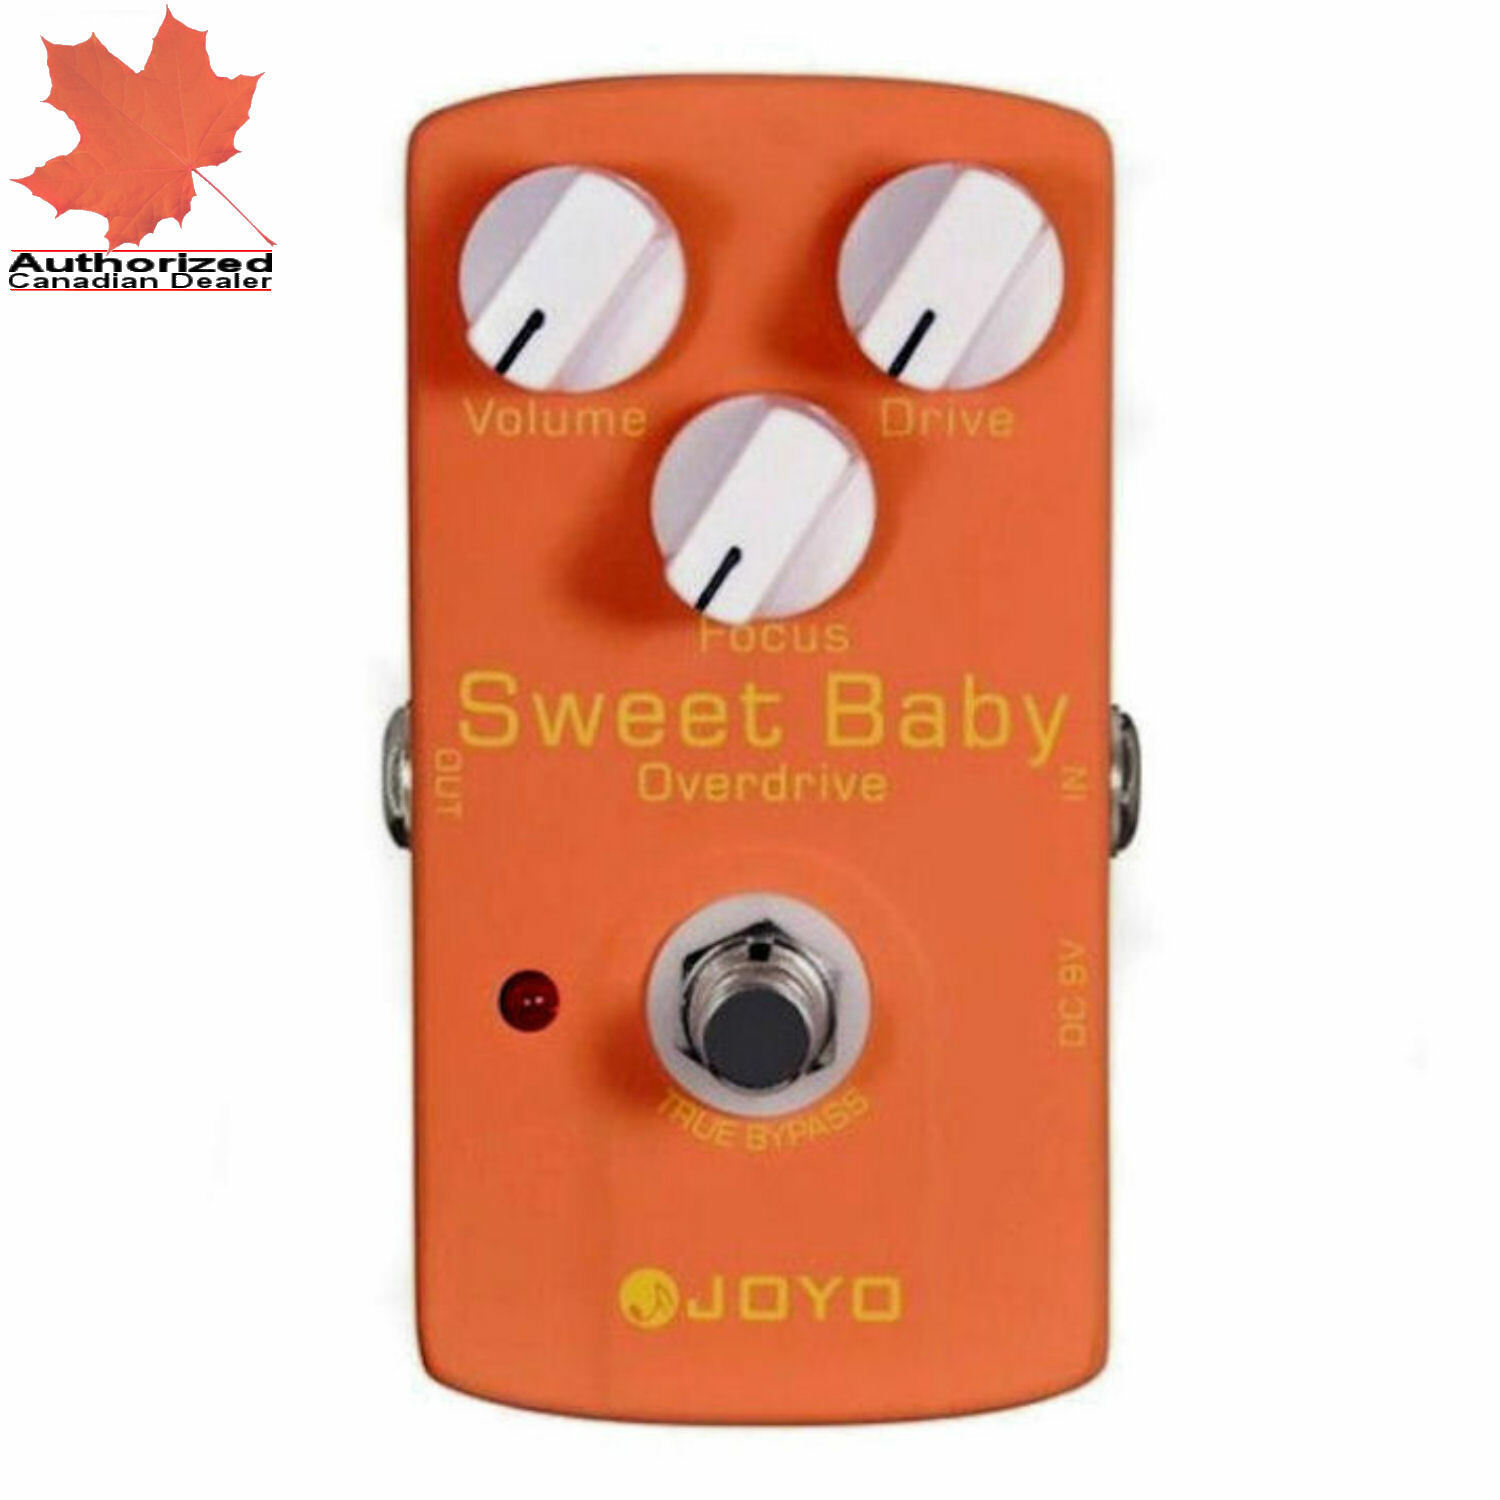 Primary image for Joyo JF-36 Sweet Baby Overdrive Guitar Pedal Aluminum alloy True Bypass New